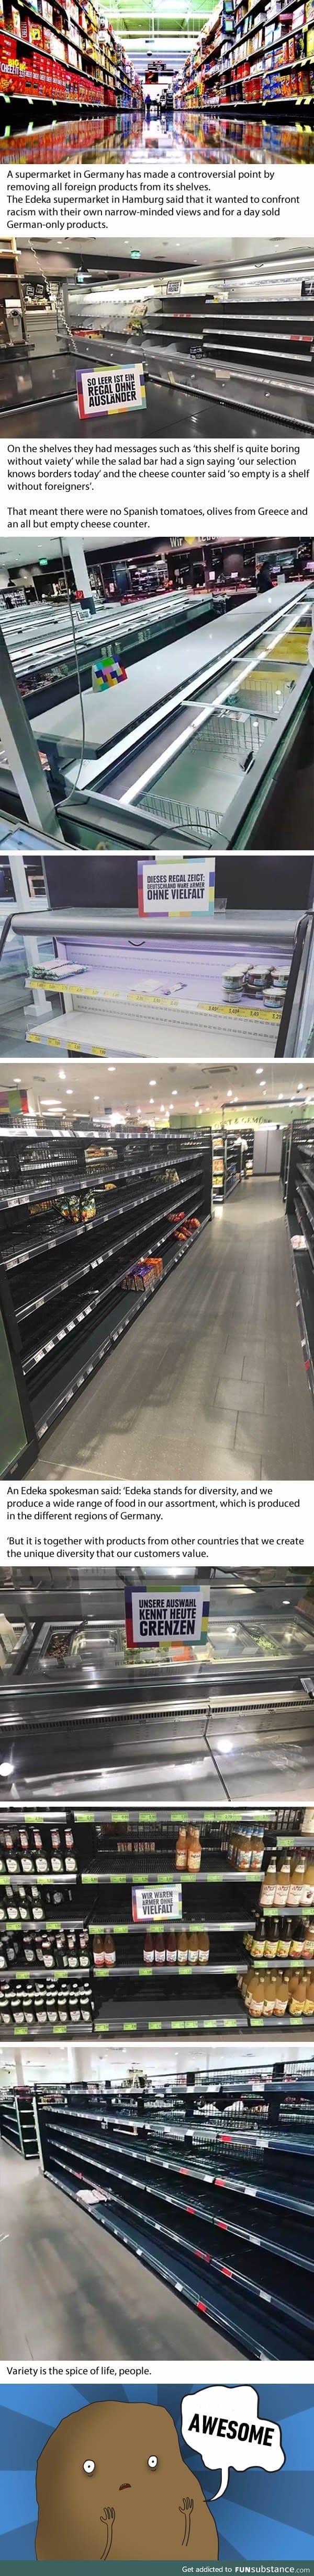 Supermarket removes all foreign products